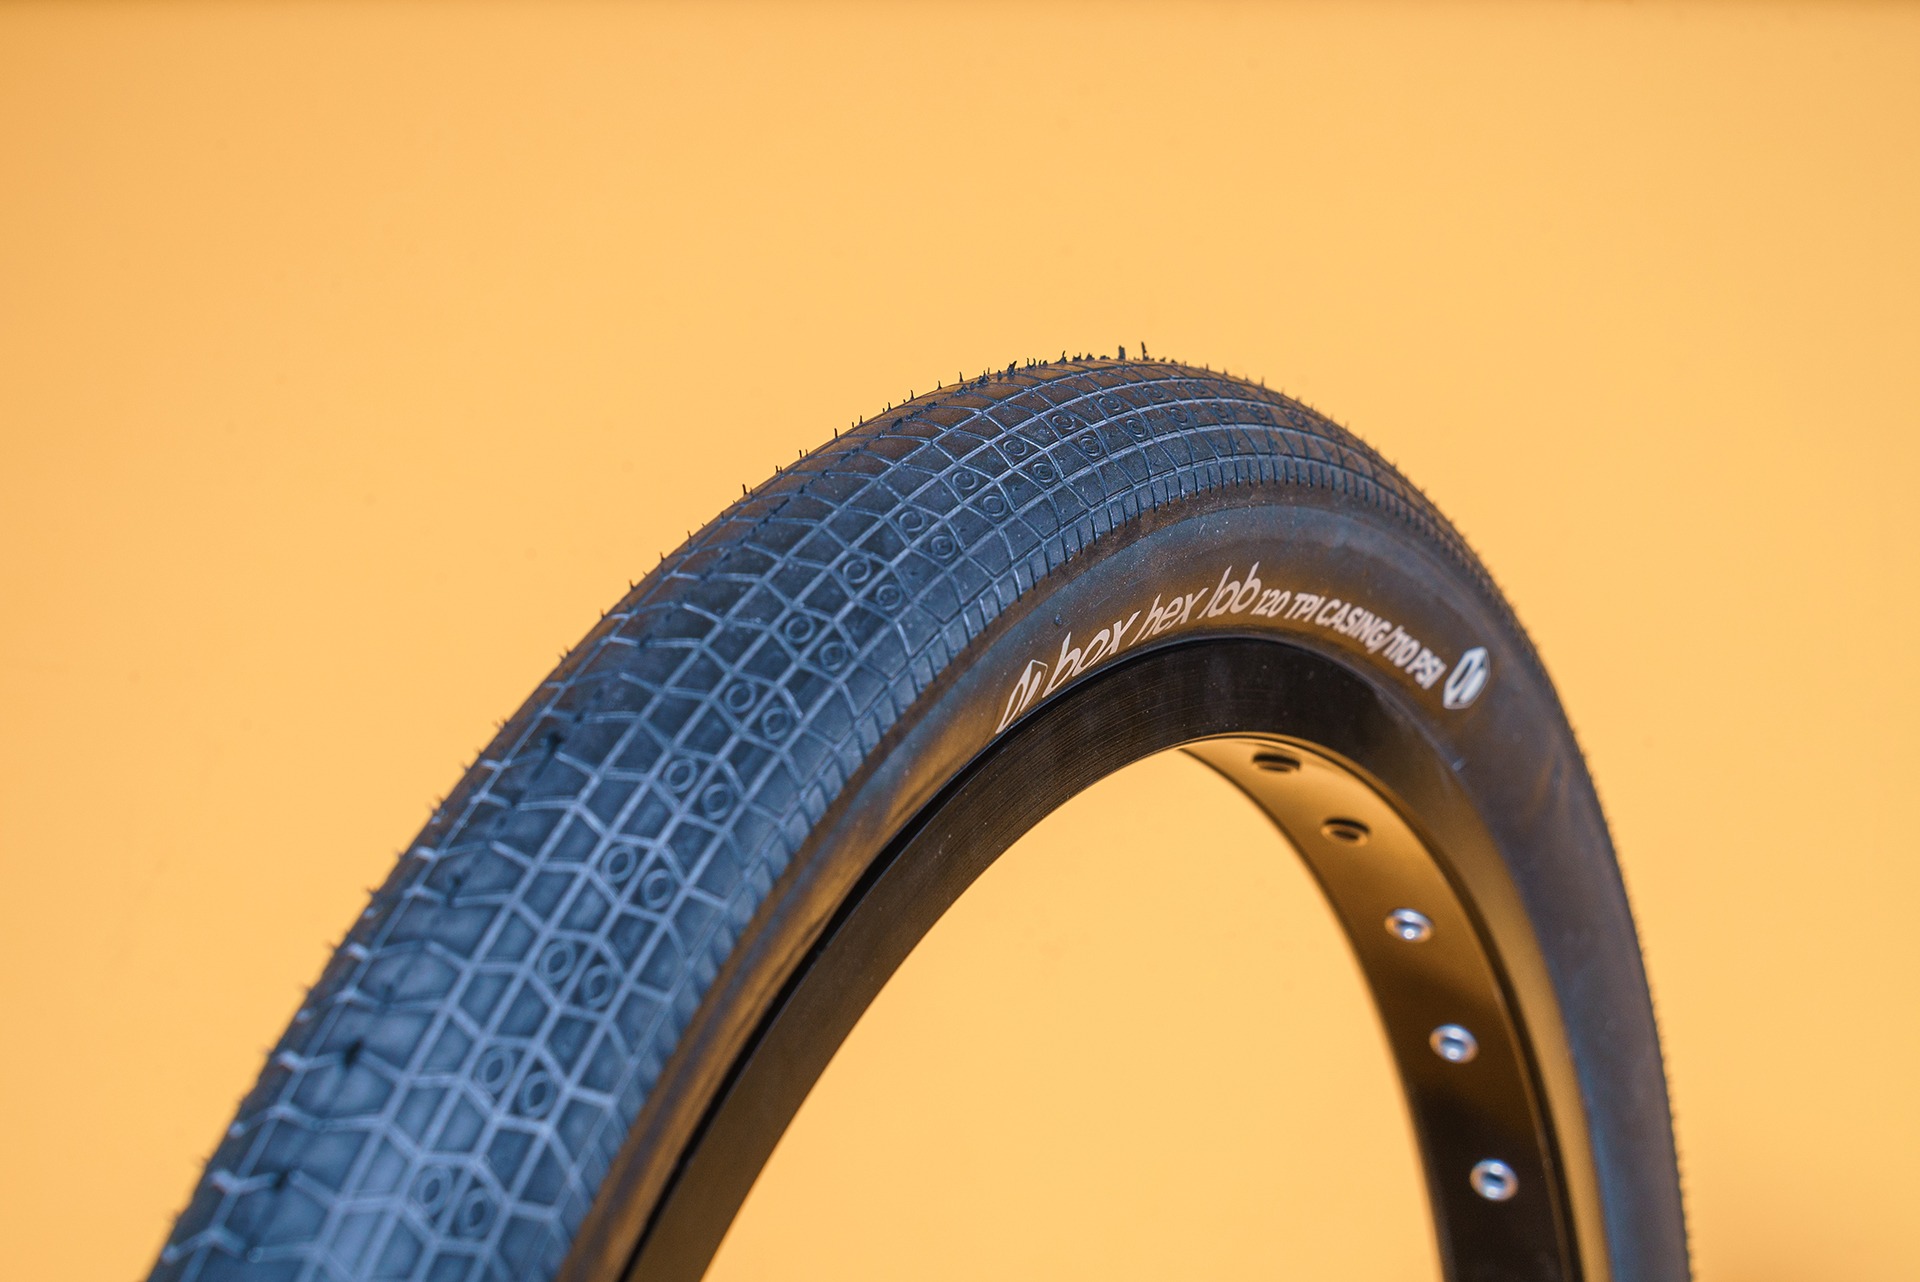 BOX - HEX LAB FOLDING TYRES - REVIEW